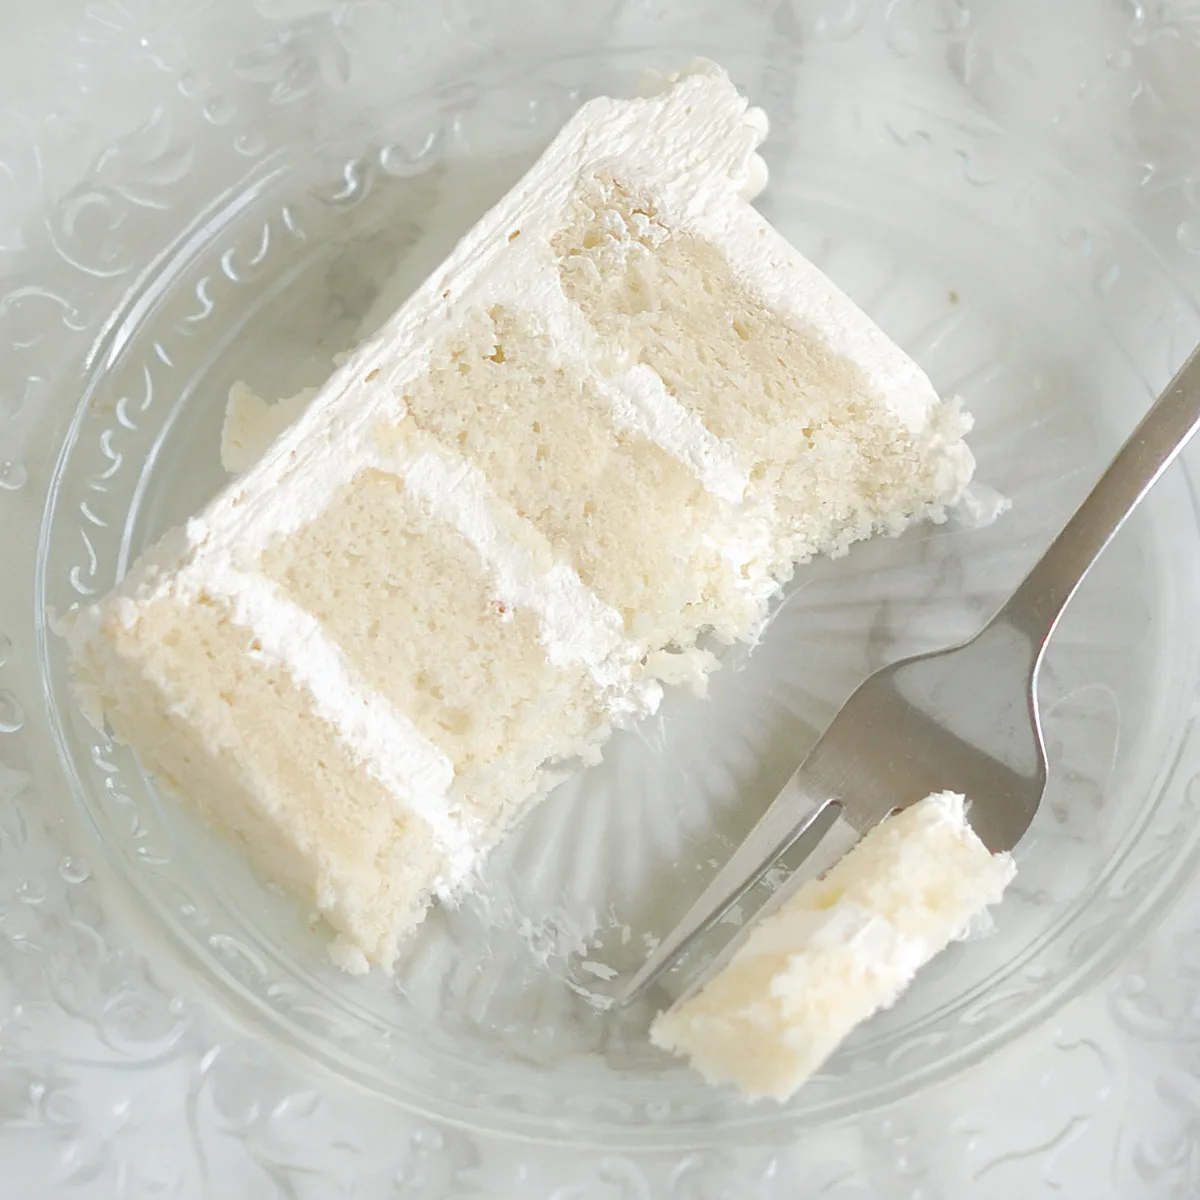 a slice of white cake on a glass plate with a fork.